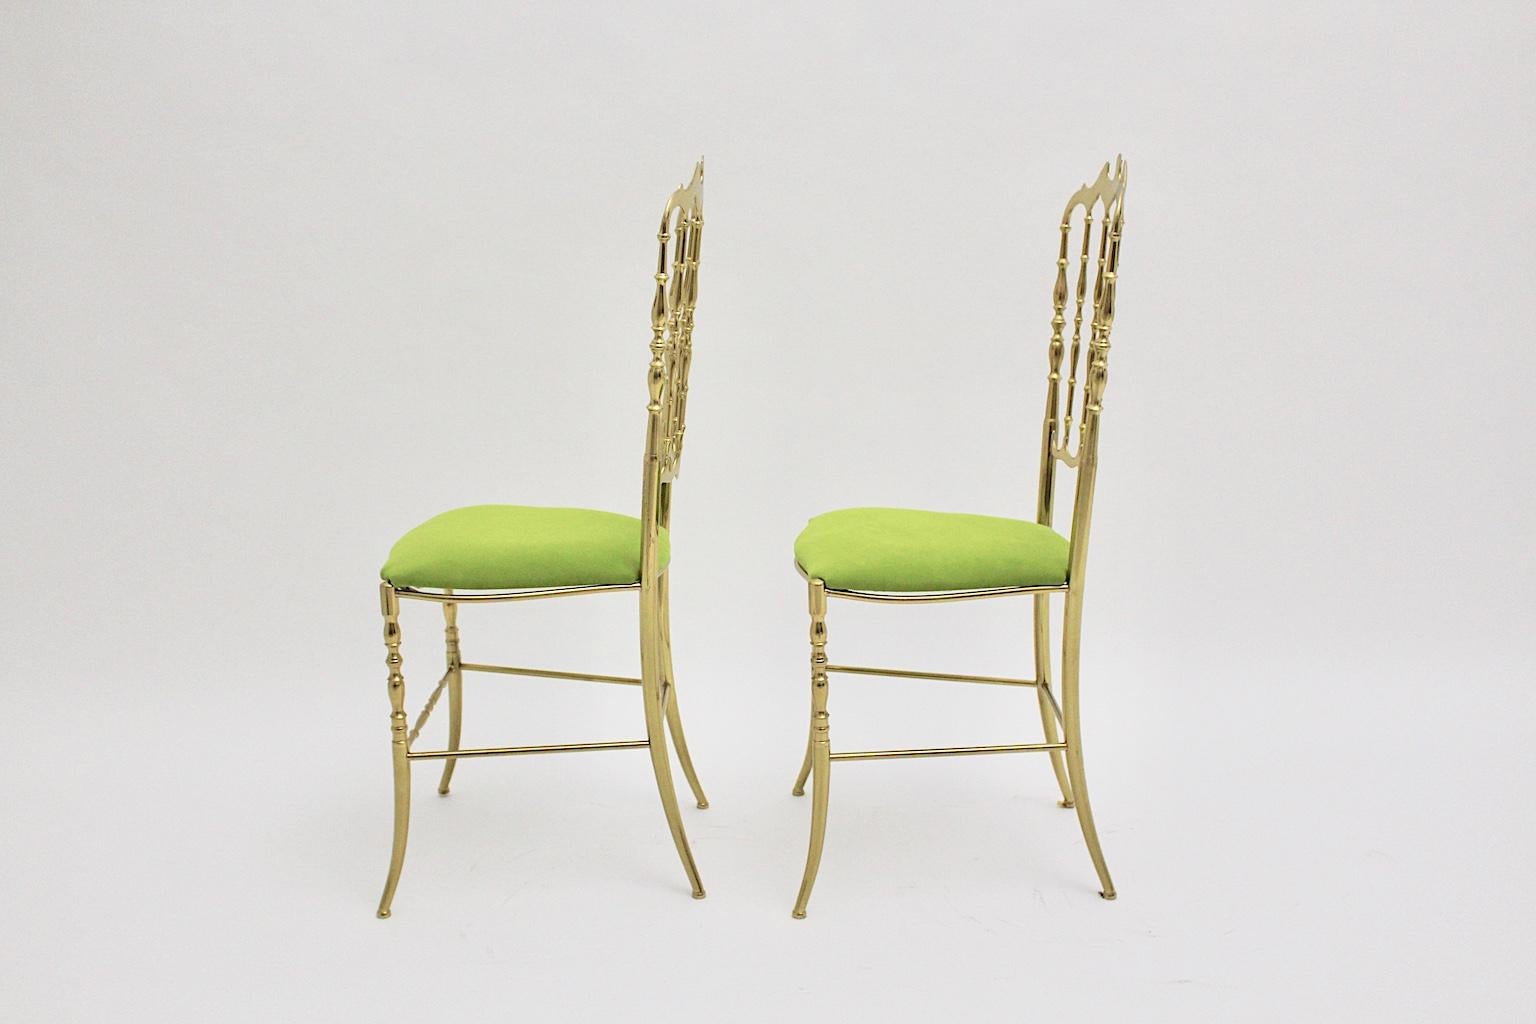 Mid-Century Modern Vintage Golden Brass Chiavari Side Chairs, 1950s, Italy For Sale 2